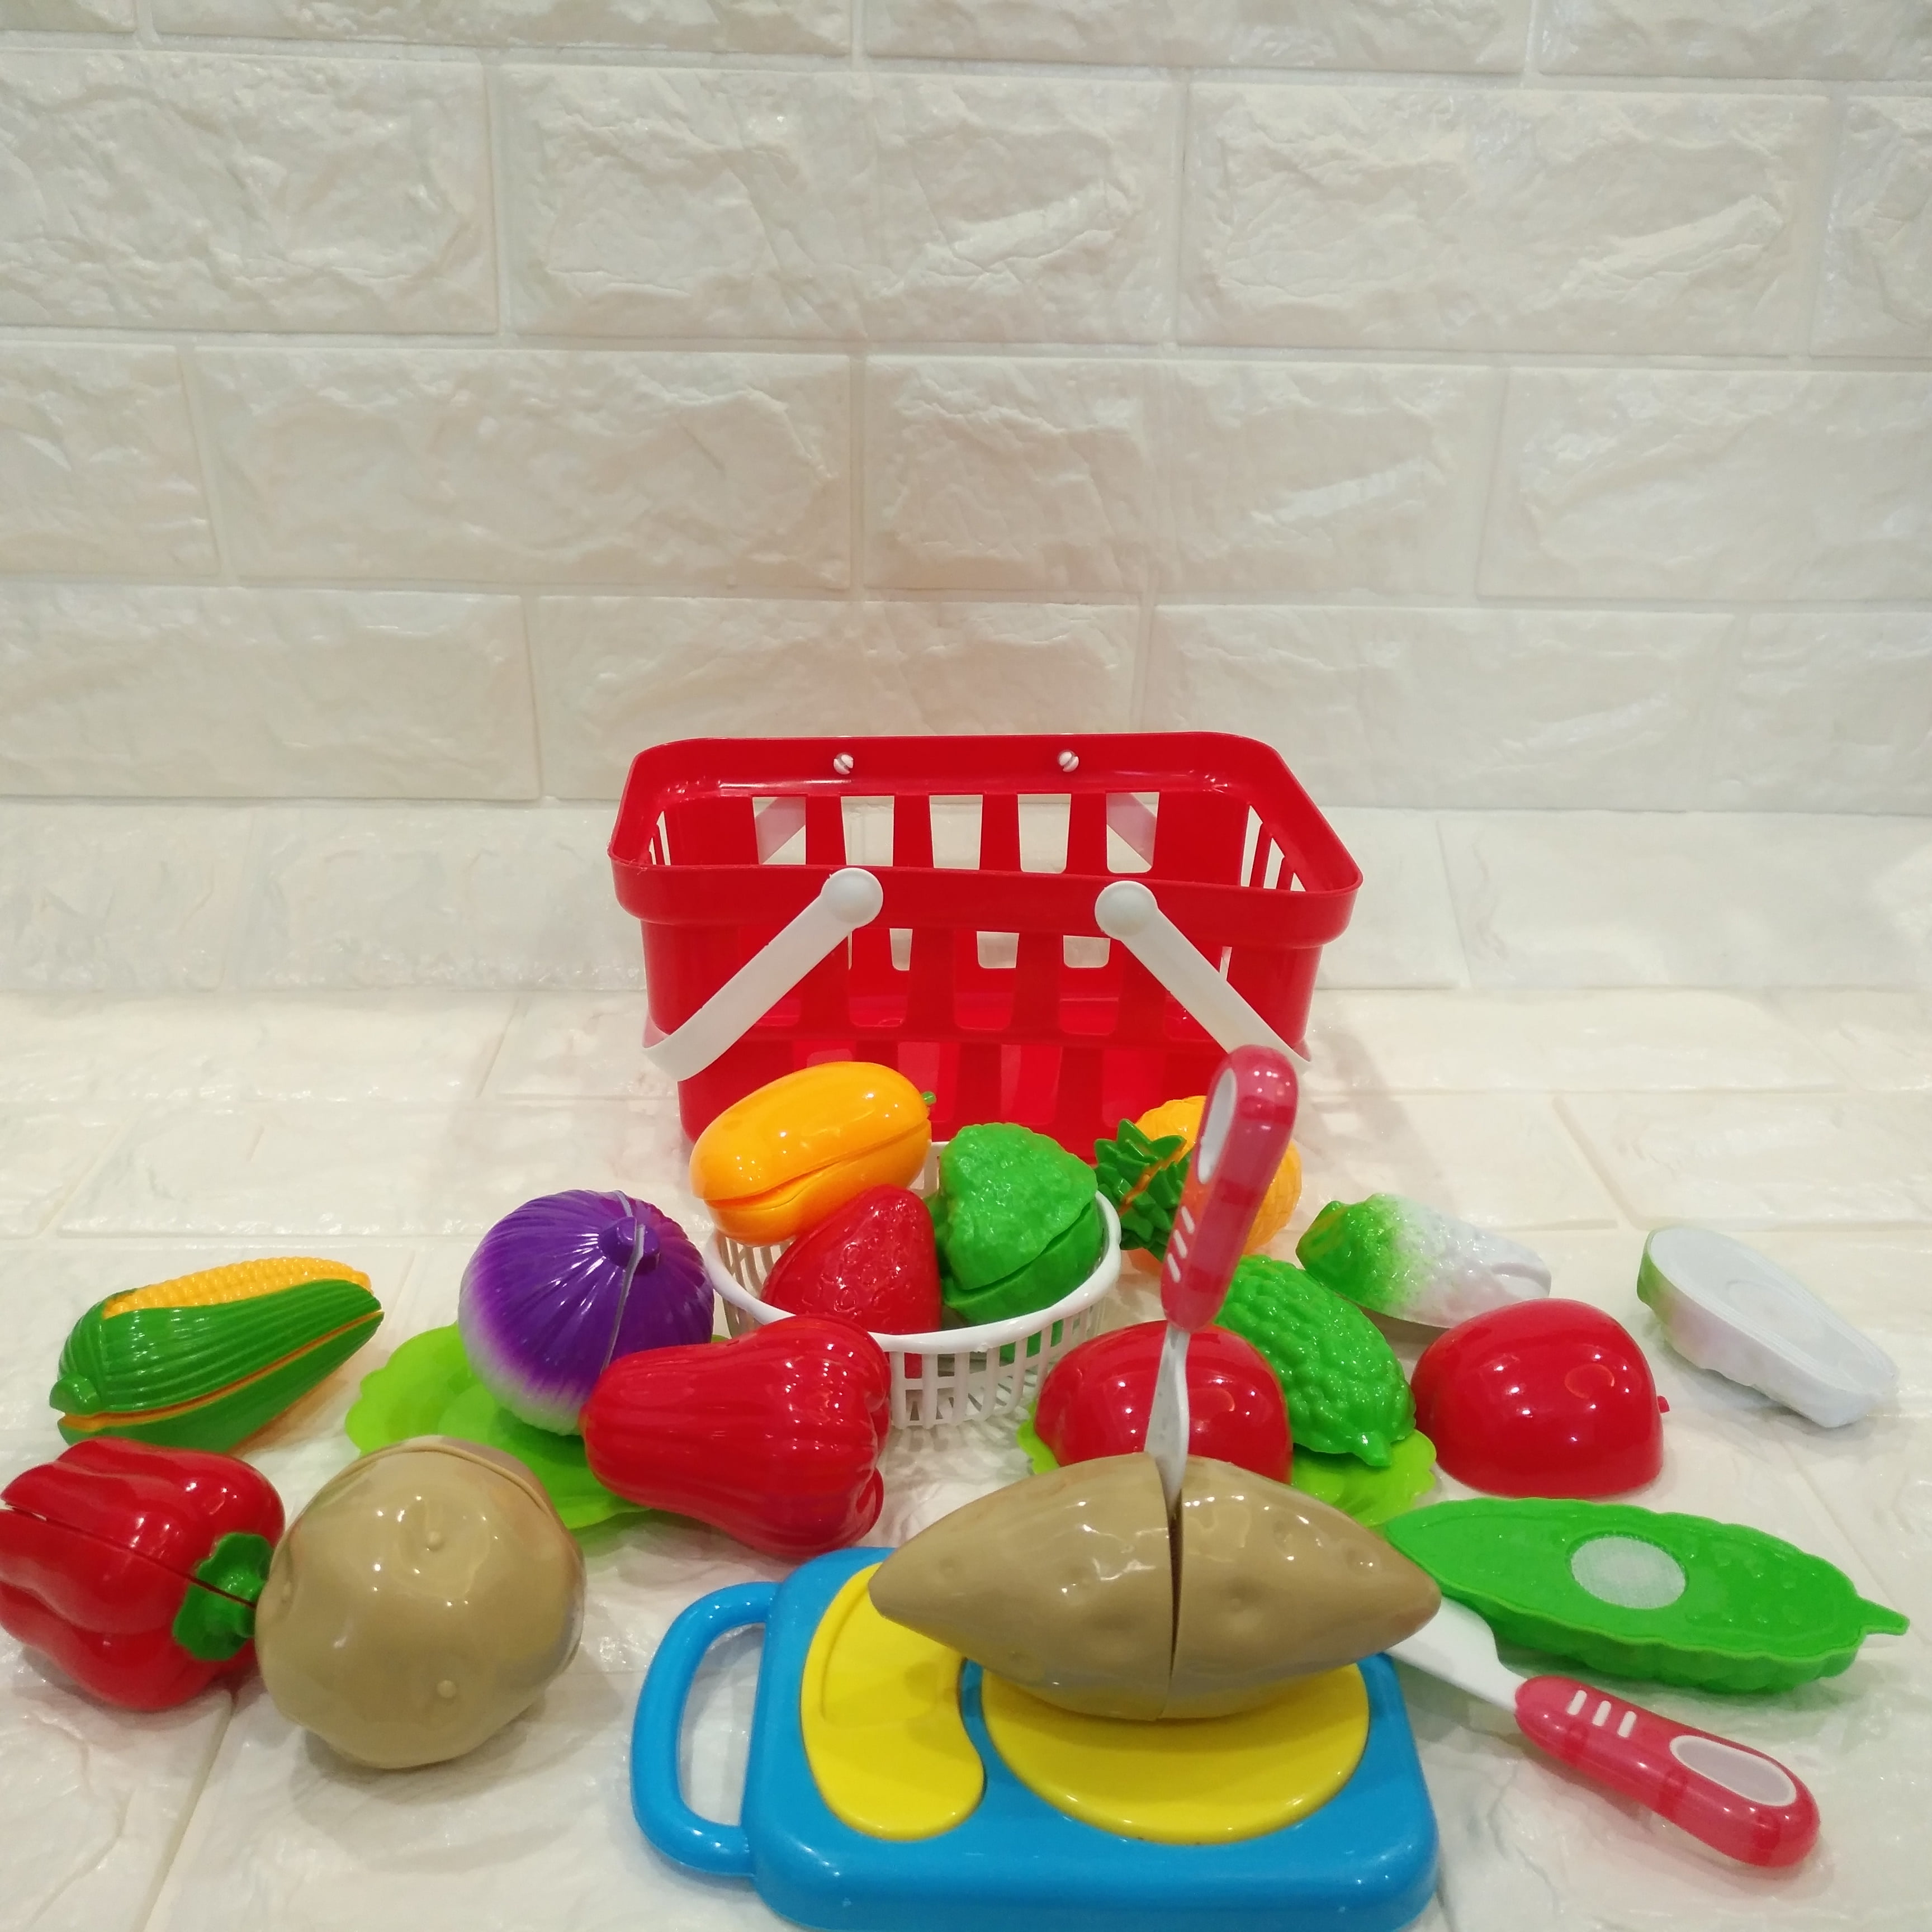 Cutting Cooking Food Playset, Pretend Play Kitchen Toy Set, Vegtables&Fruit Early Educational